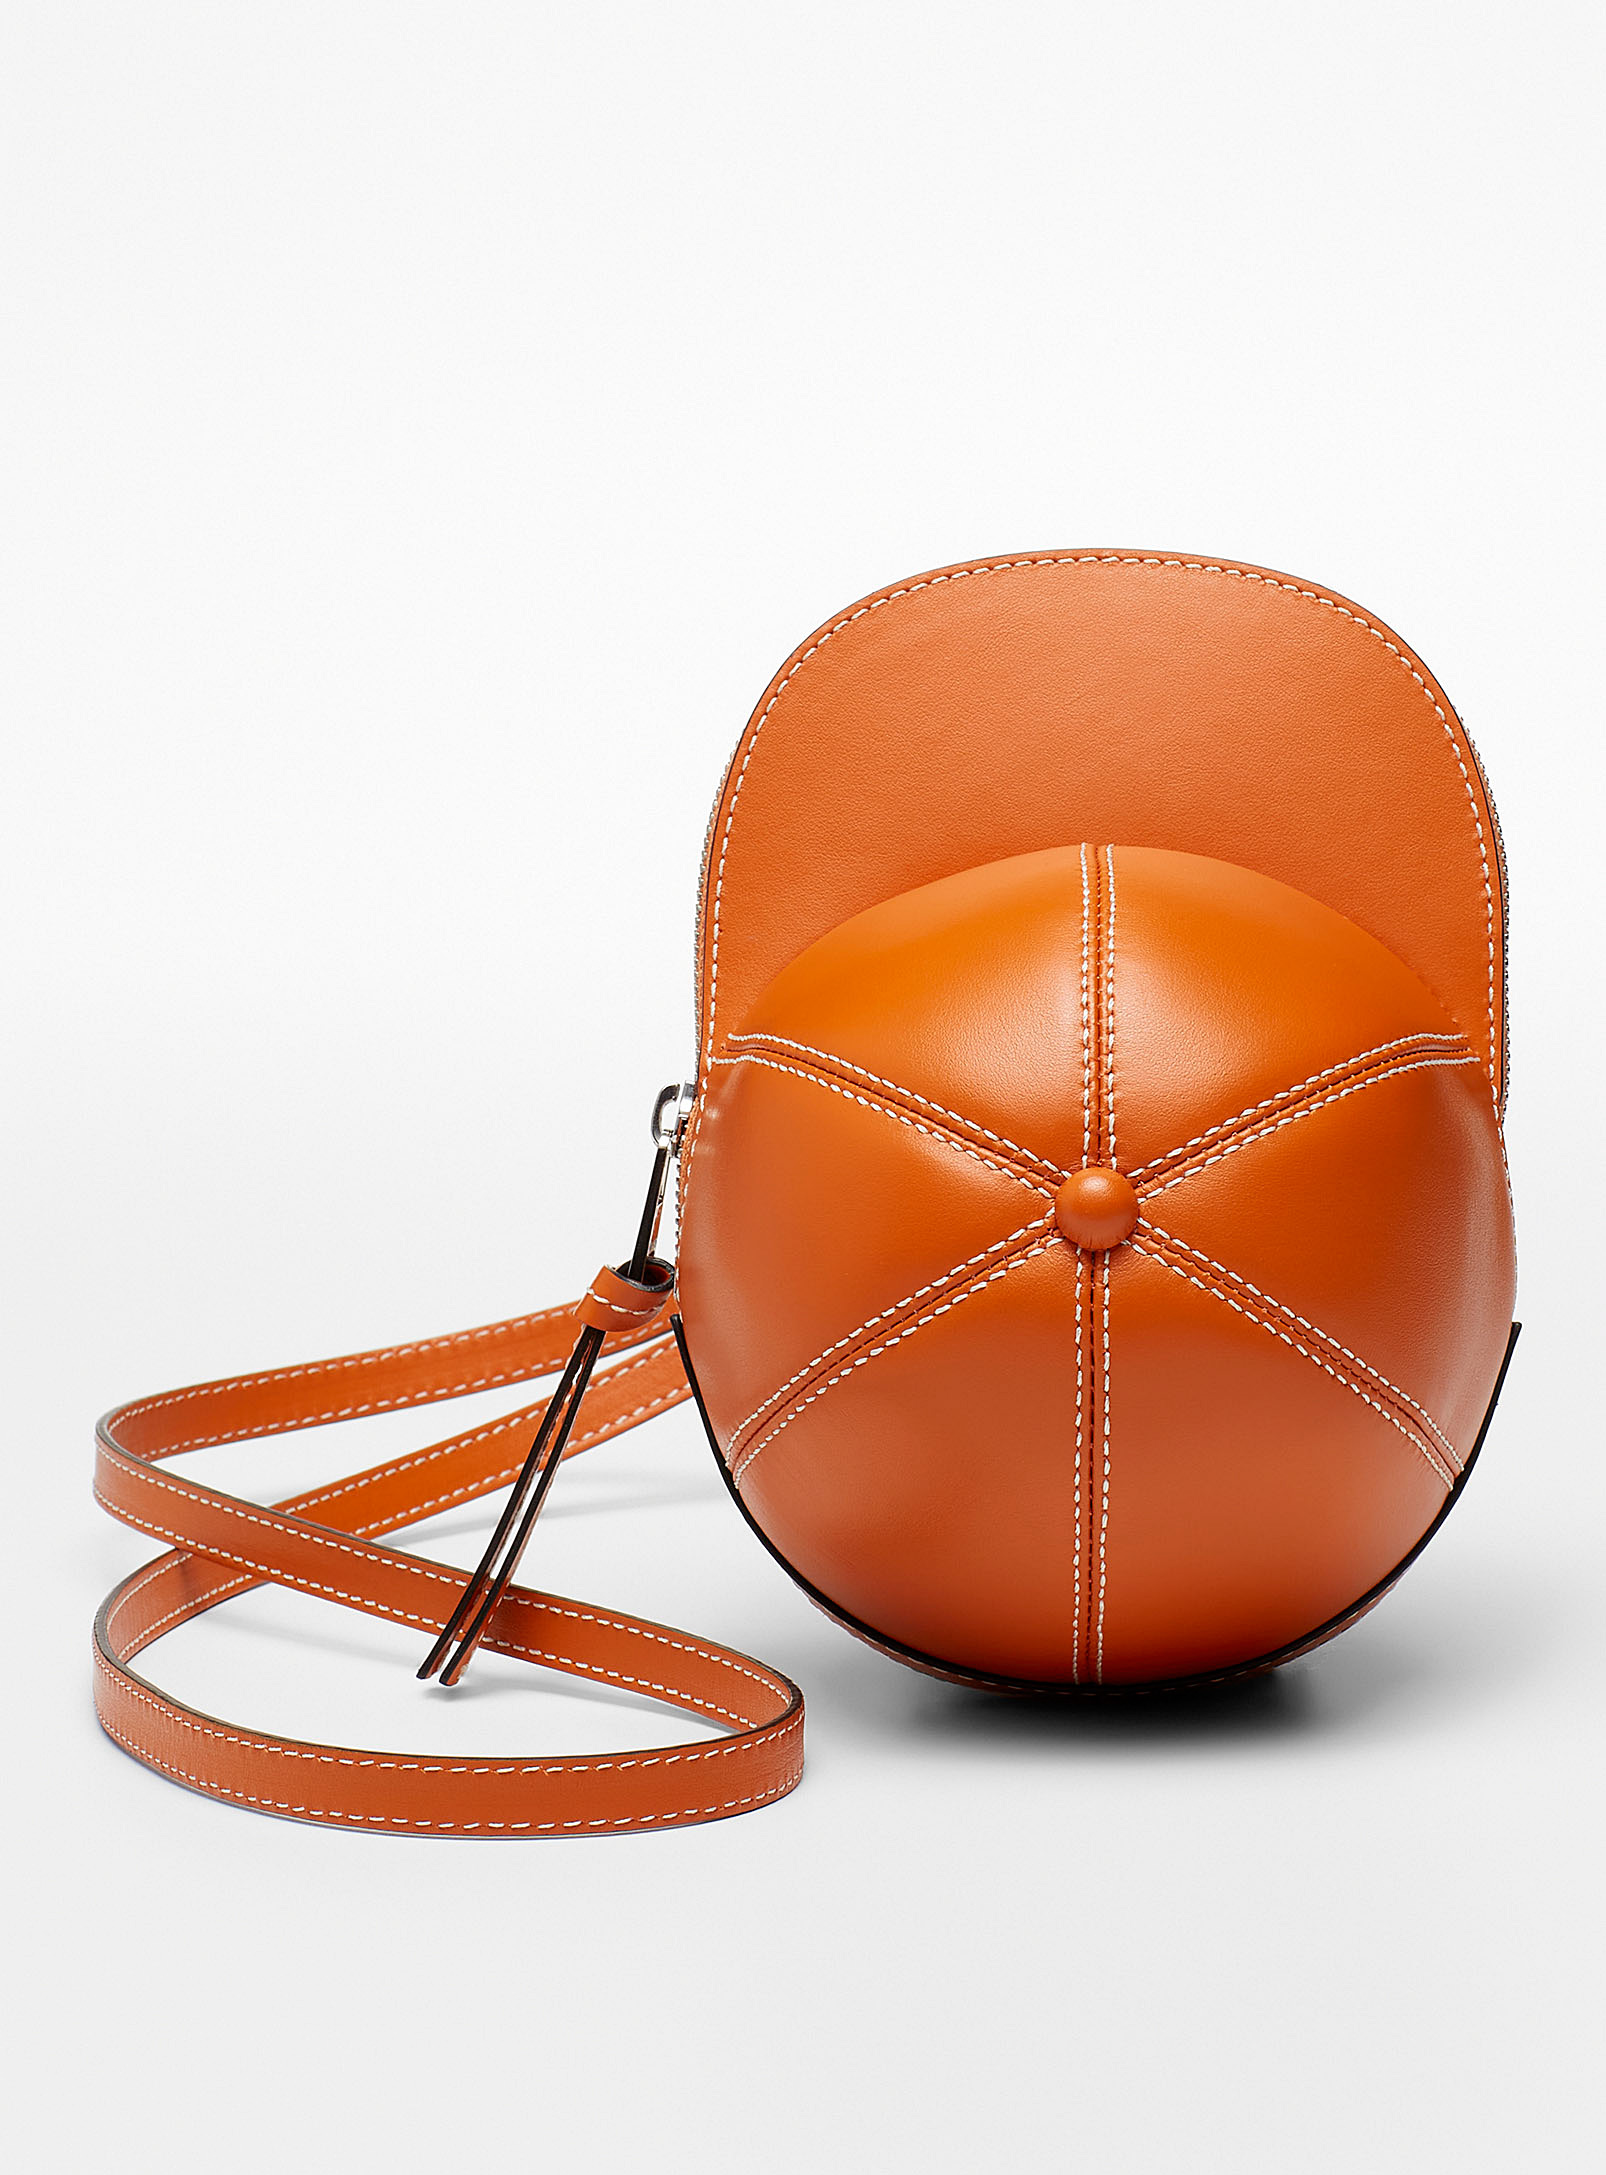 Jw Anderson The Leather Cap Bag In Orange